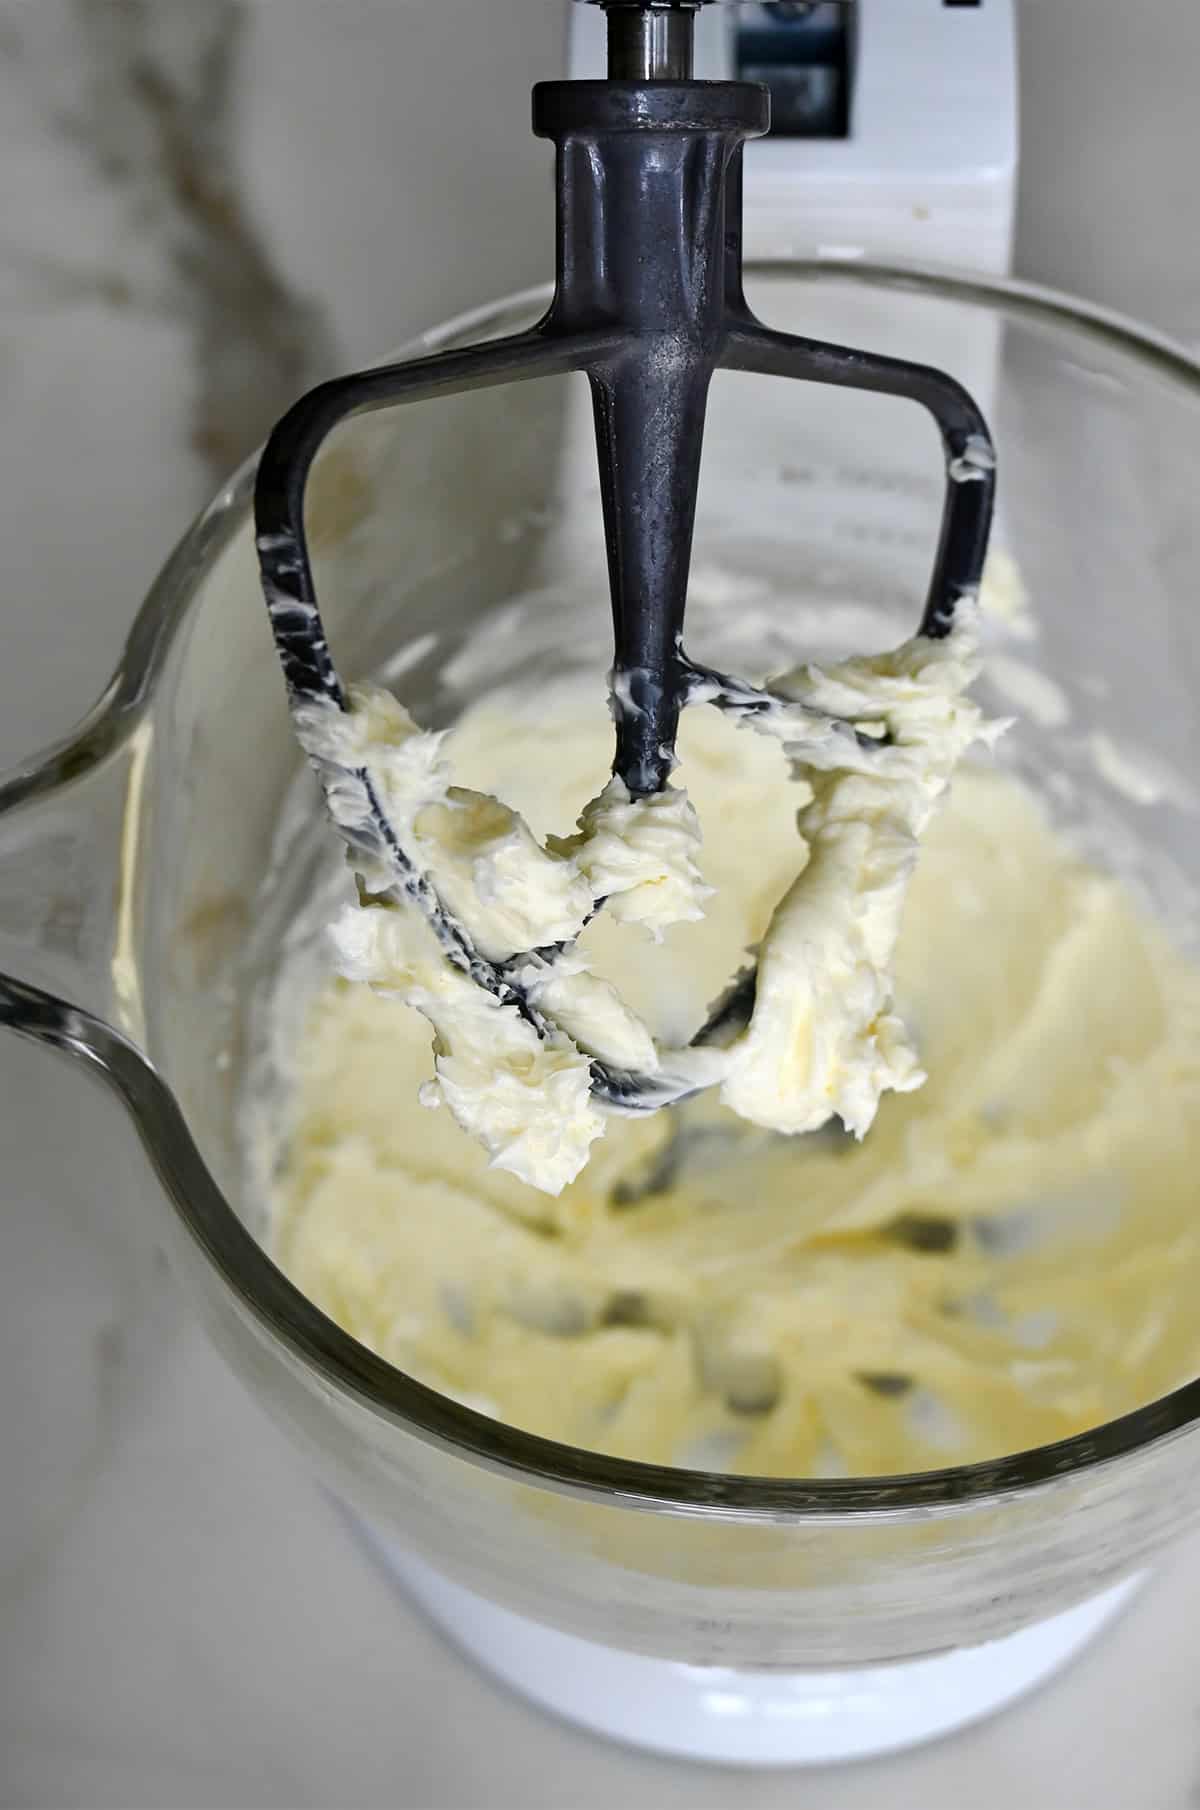 The paddle attachment of a stand mixer covered in whipped butter.